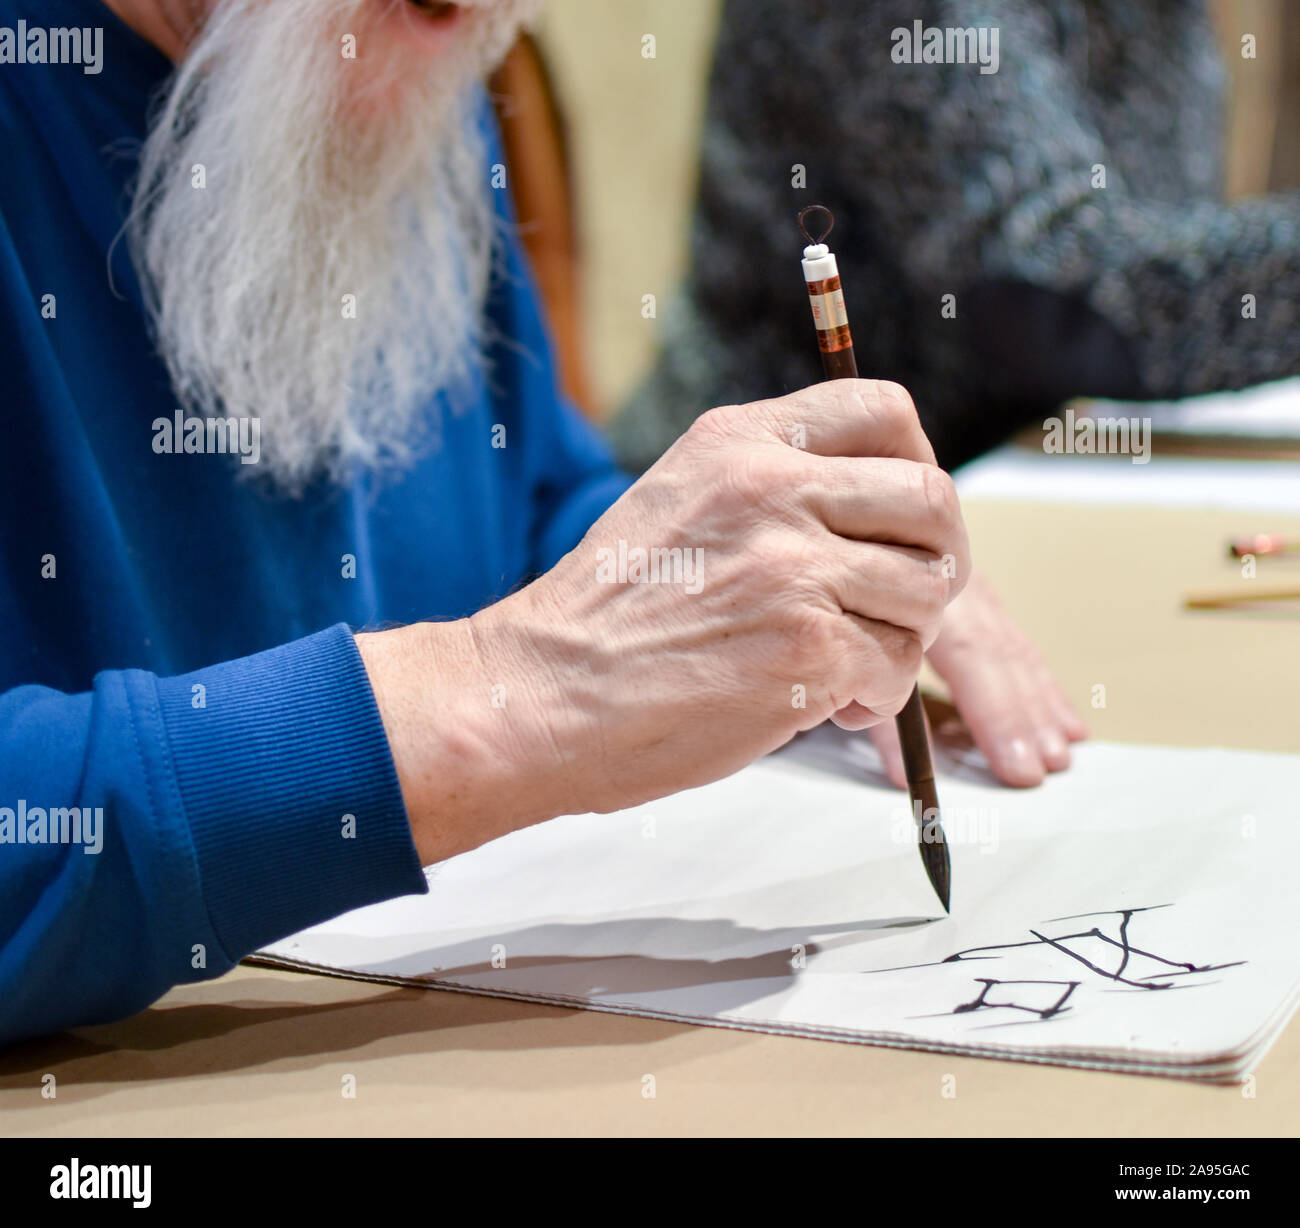 Calligraphy master drawing chinese hieroglyph with a brush Stock Photo